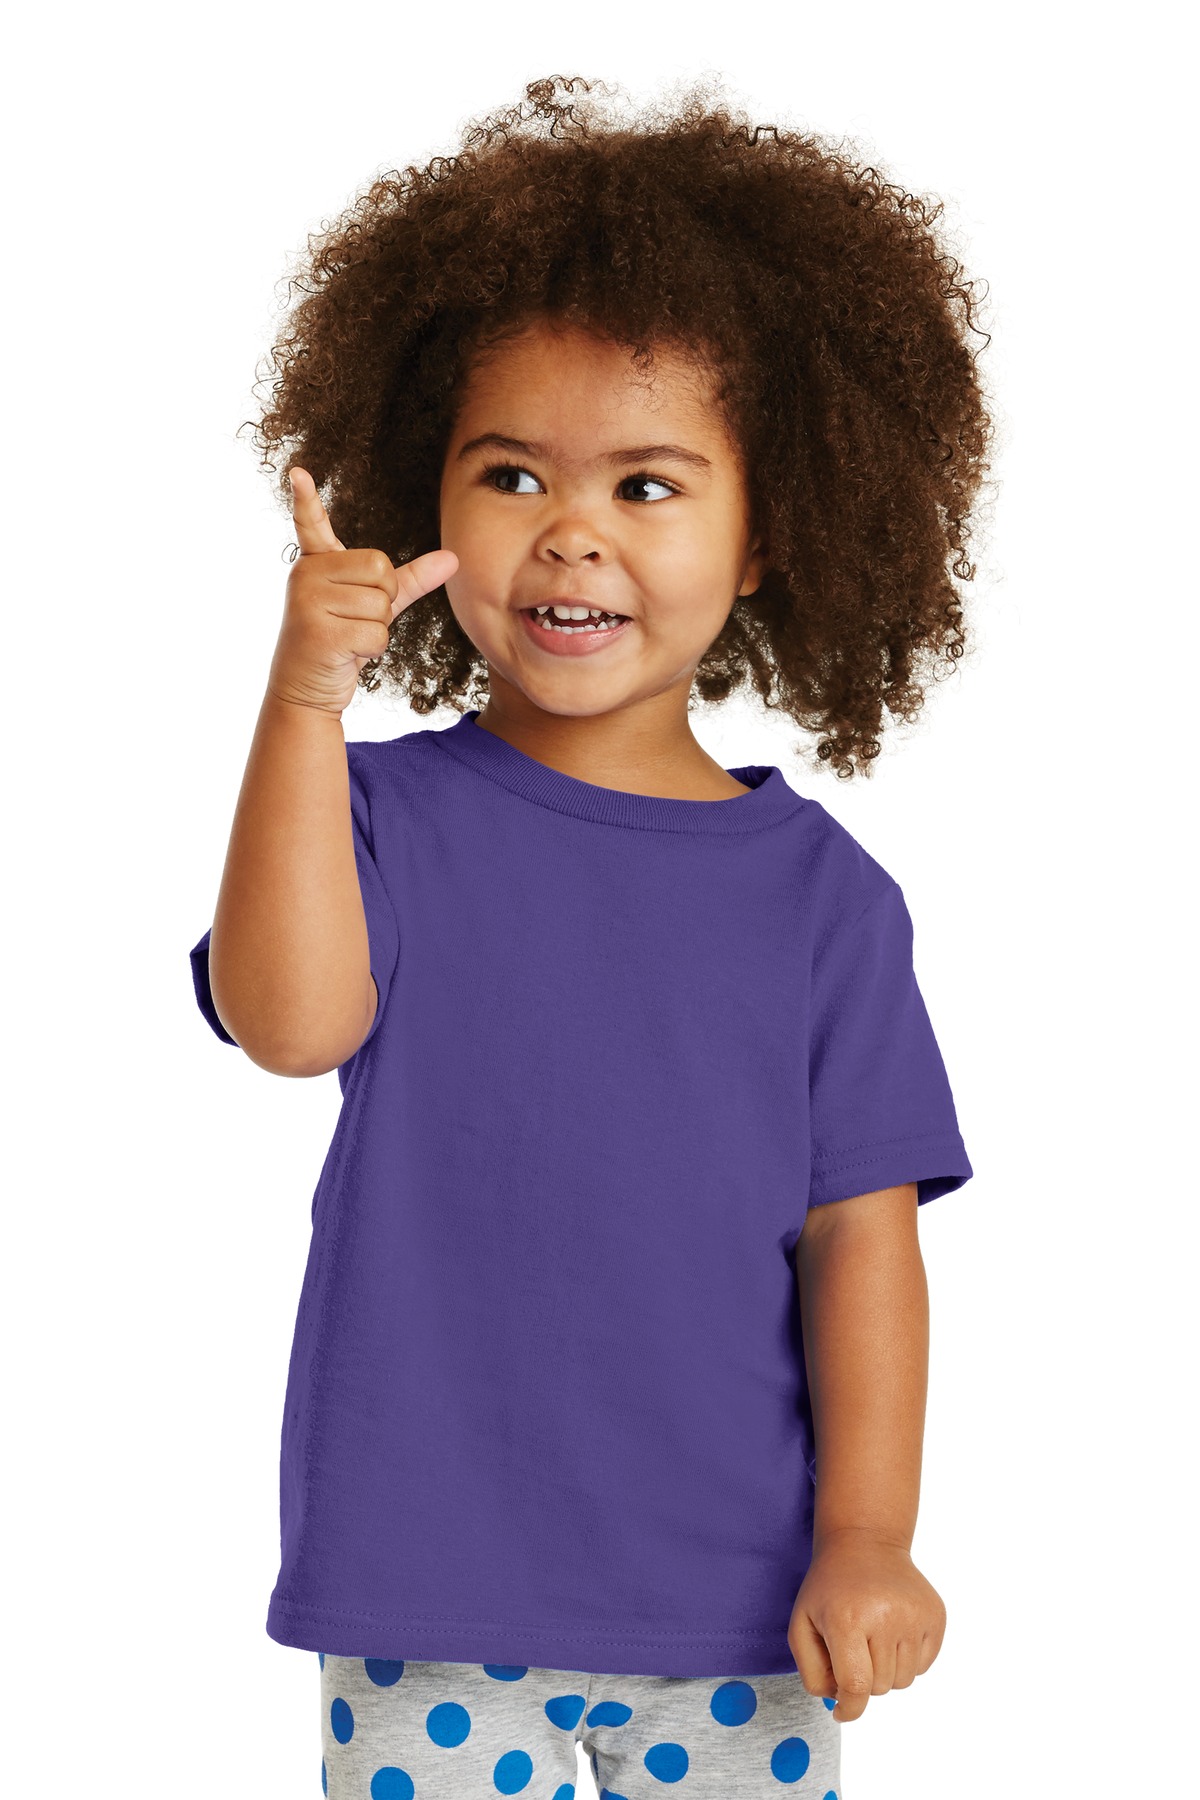 Port & Company Toddler Core Cotton Tee. CAR54T